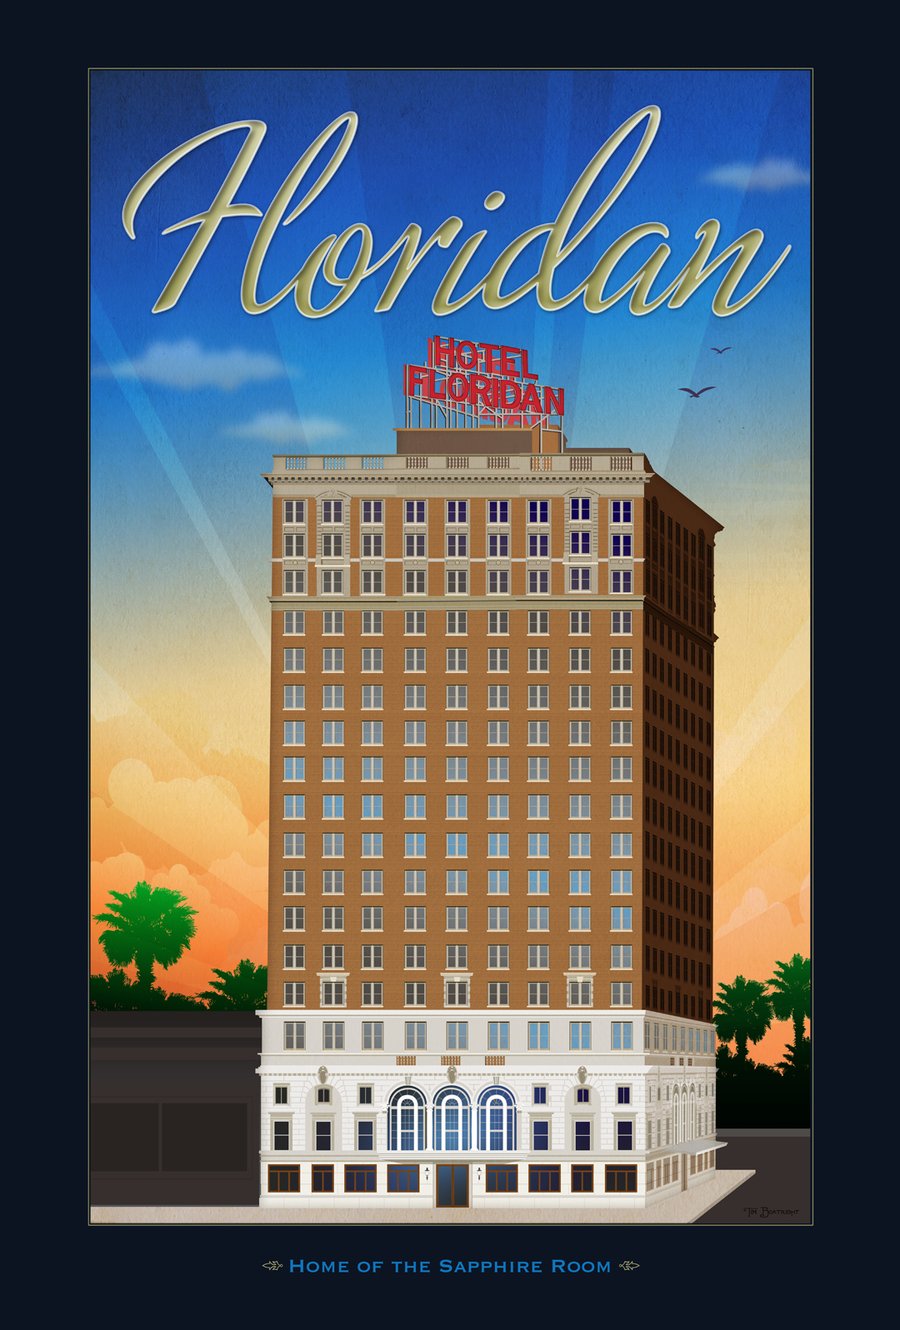 Image of The Floridan Hotel